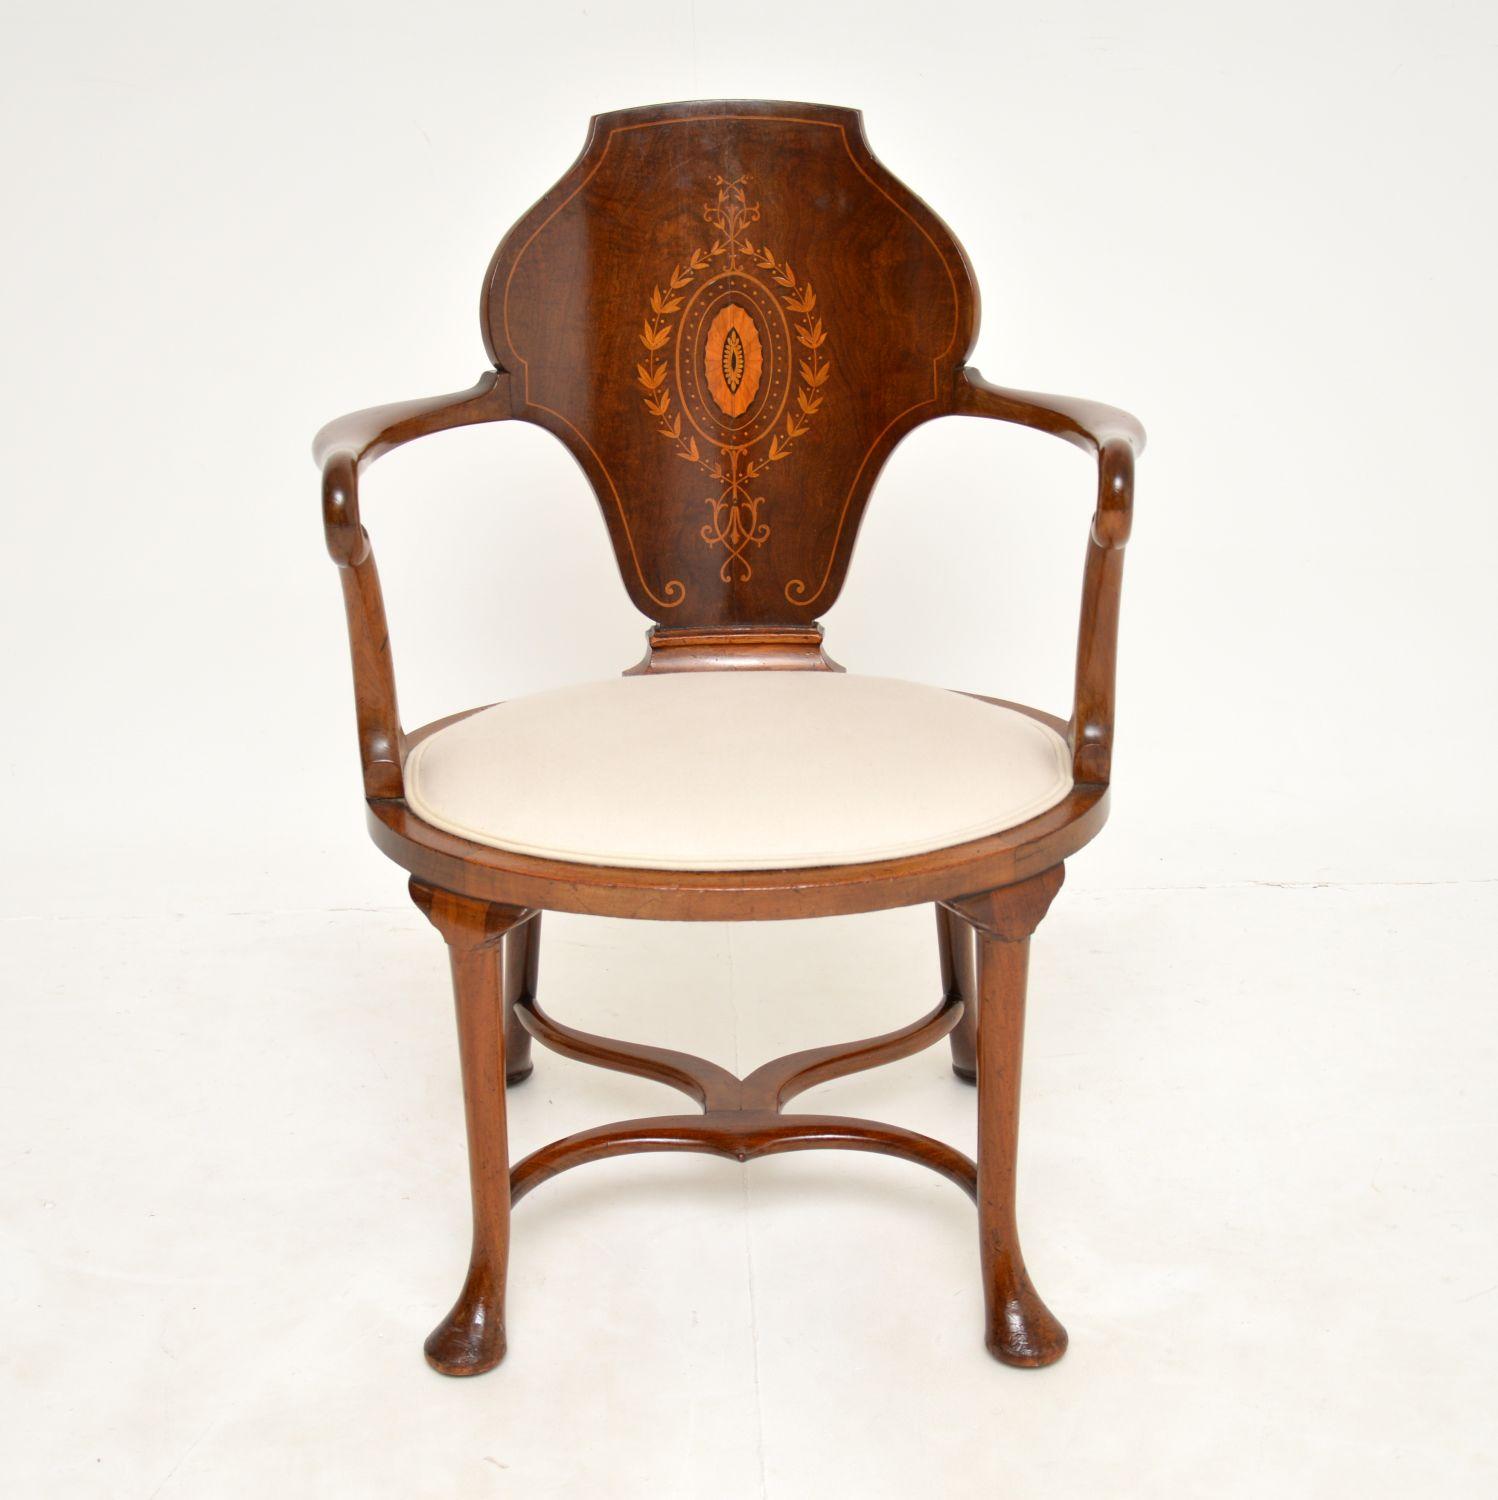 A superb antique Edwardian armchair. This was made in England, it dates from around the 1890-1900 period.

It is of very fine quality and has a stunning design. The frame is not too imposing, with a beautifully shaped back, stunning curves on the